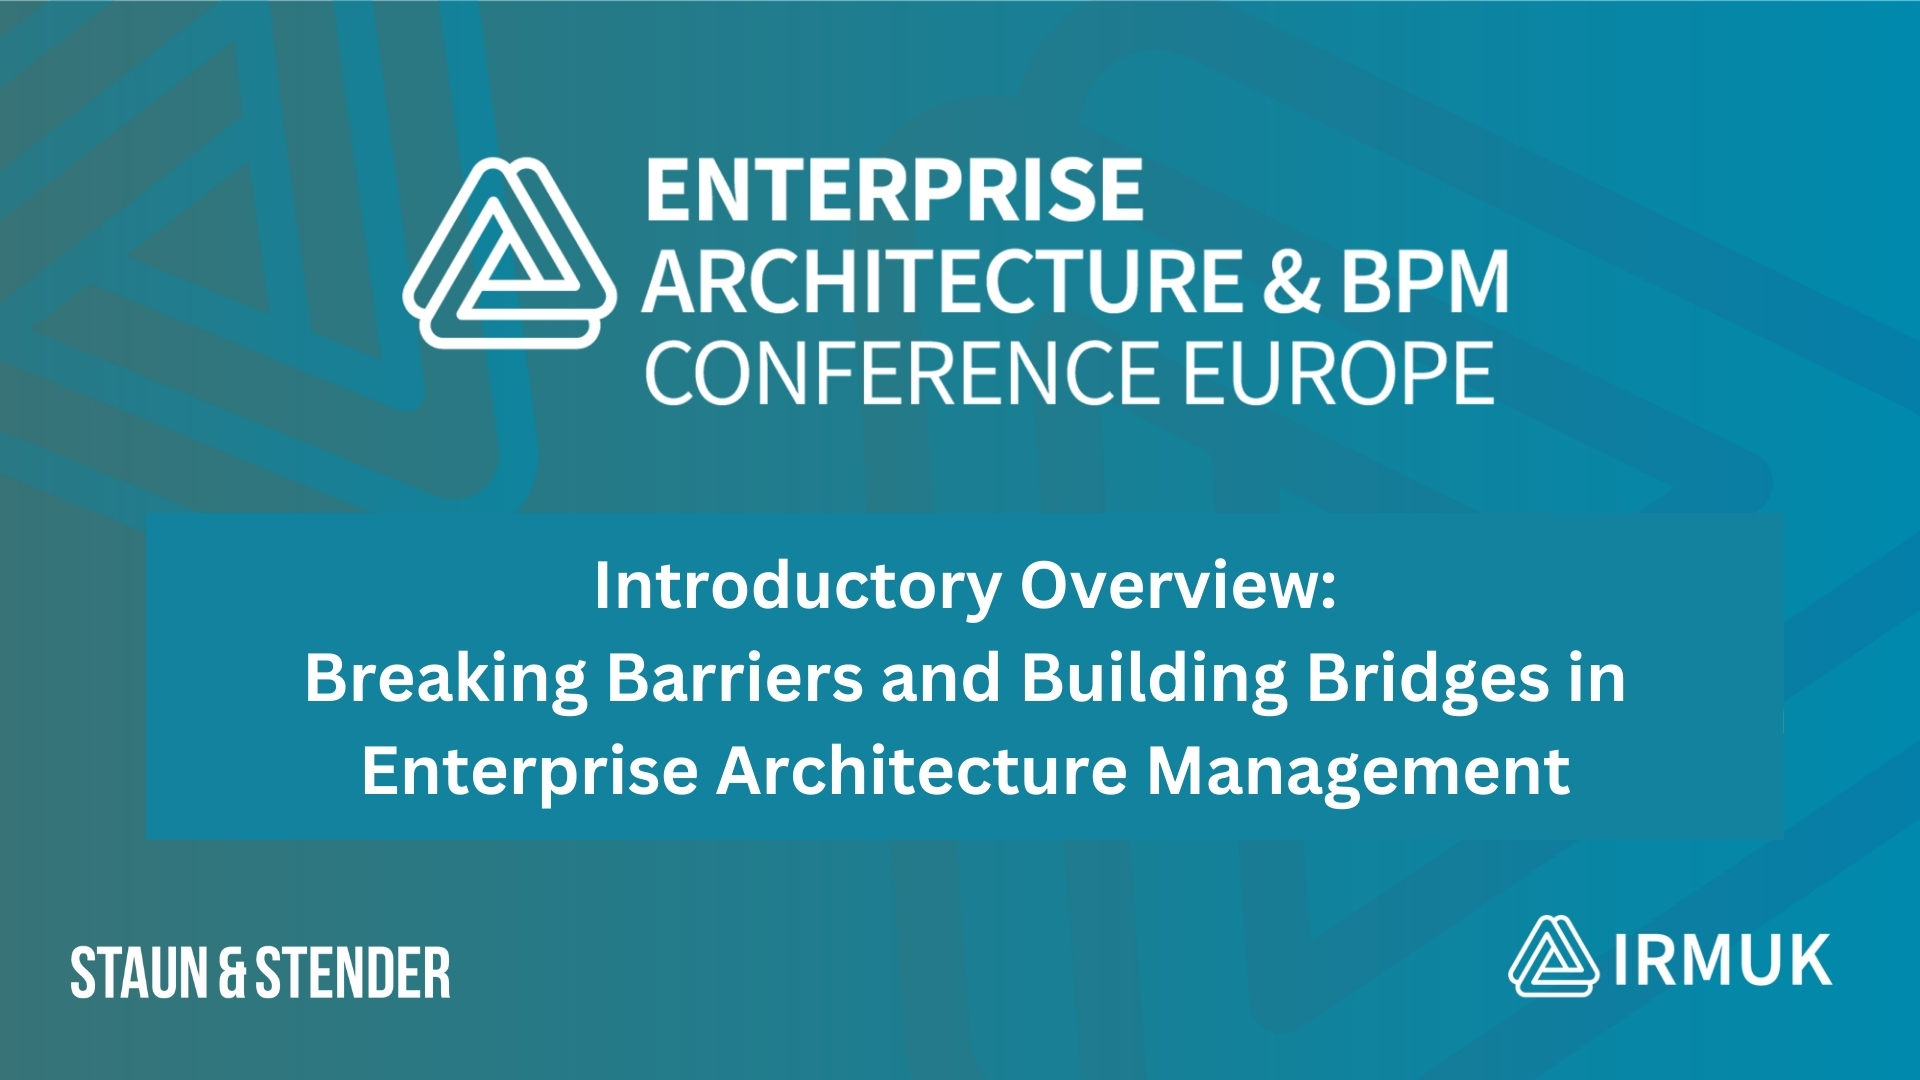 Introductory Overview: Breaking Barriers and Building Bridges in Enterprise Architecture Management